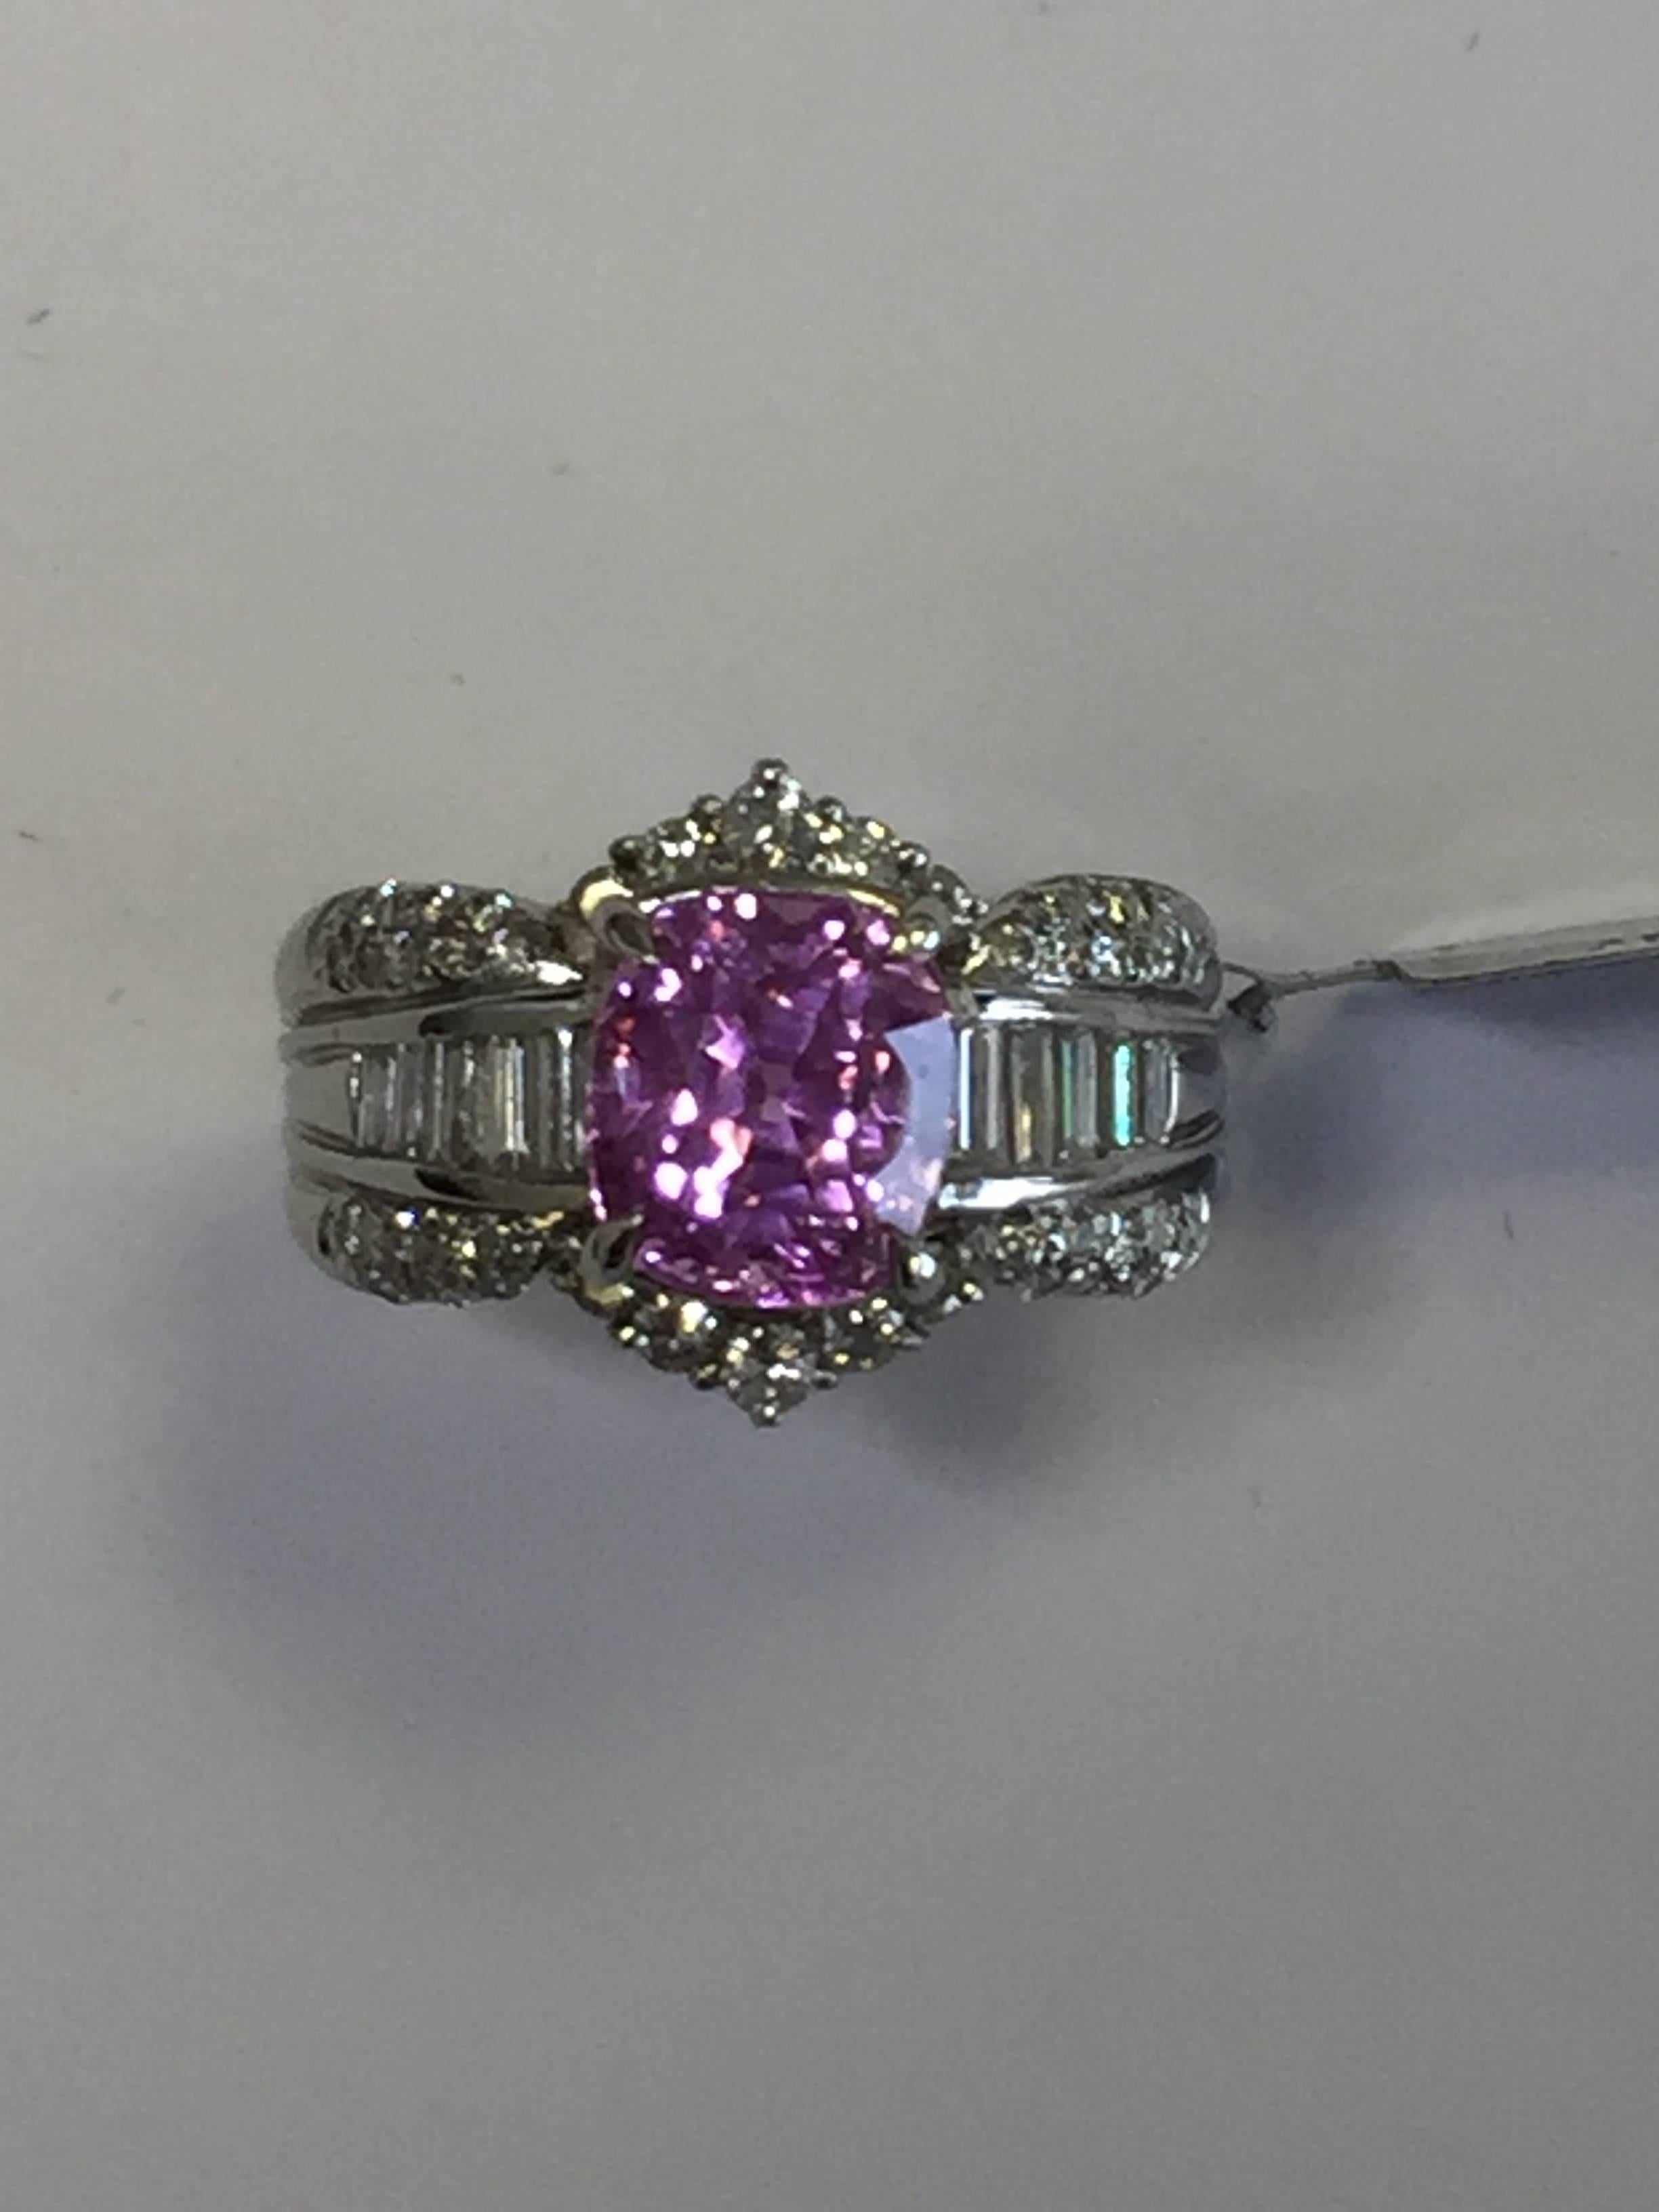 4.61 carat gorgeous Ceylon pink sapphire cushion with 0.94 carats of white diamond baguettes and rounds in platinum mounting.  This cocktail ring is perfect for any occasion and will compliment any outfit because of the bright pink shade!  Size 6.75.